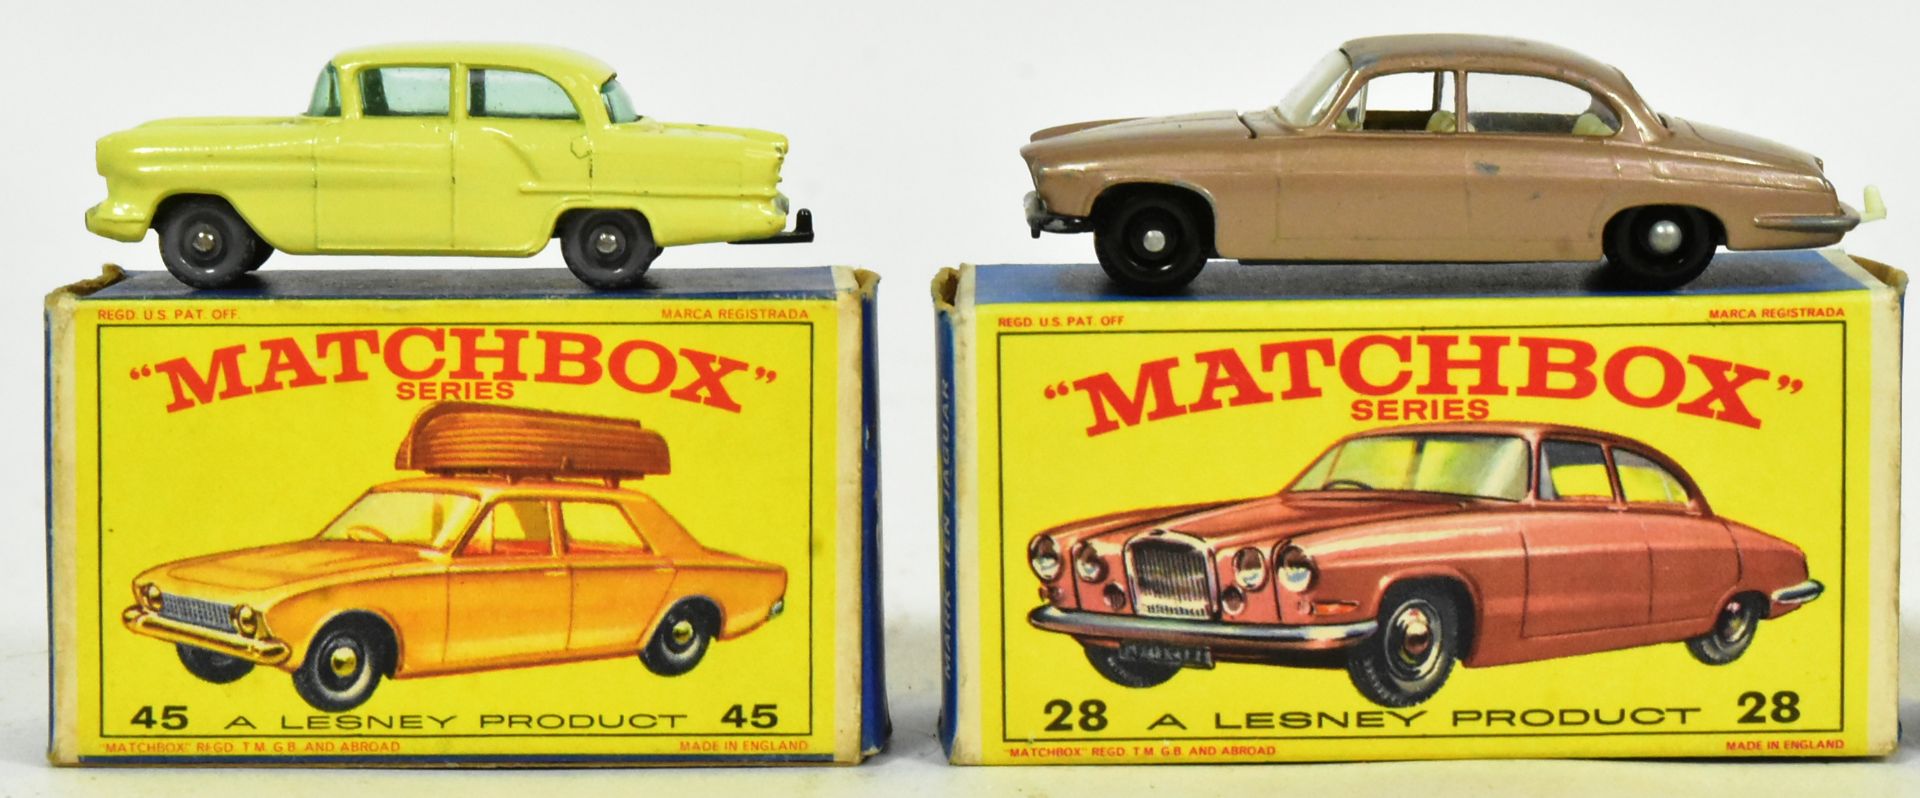 DIECAST - COLLECTION OF VINTAGE MATCHBOX DIECAST MODELS - Image 2 of 4